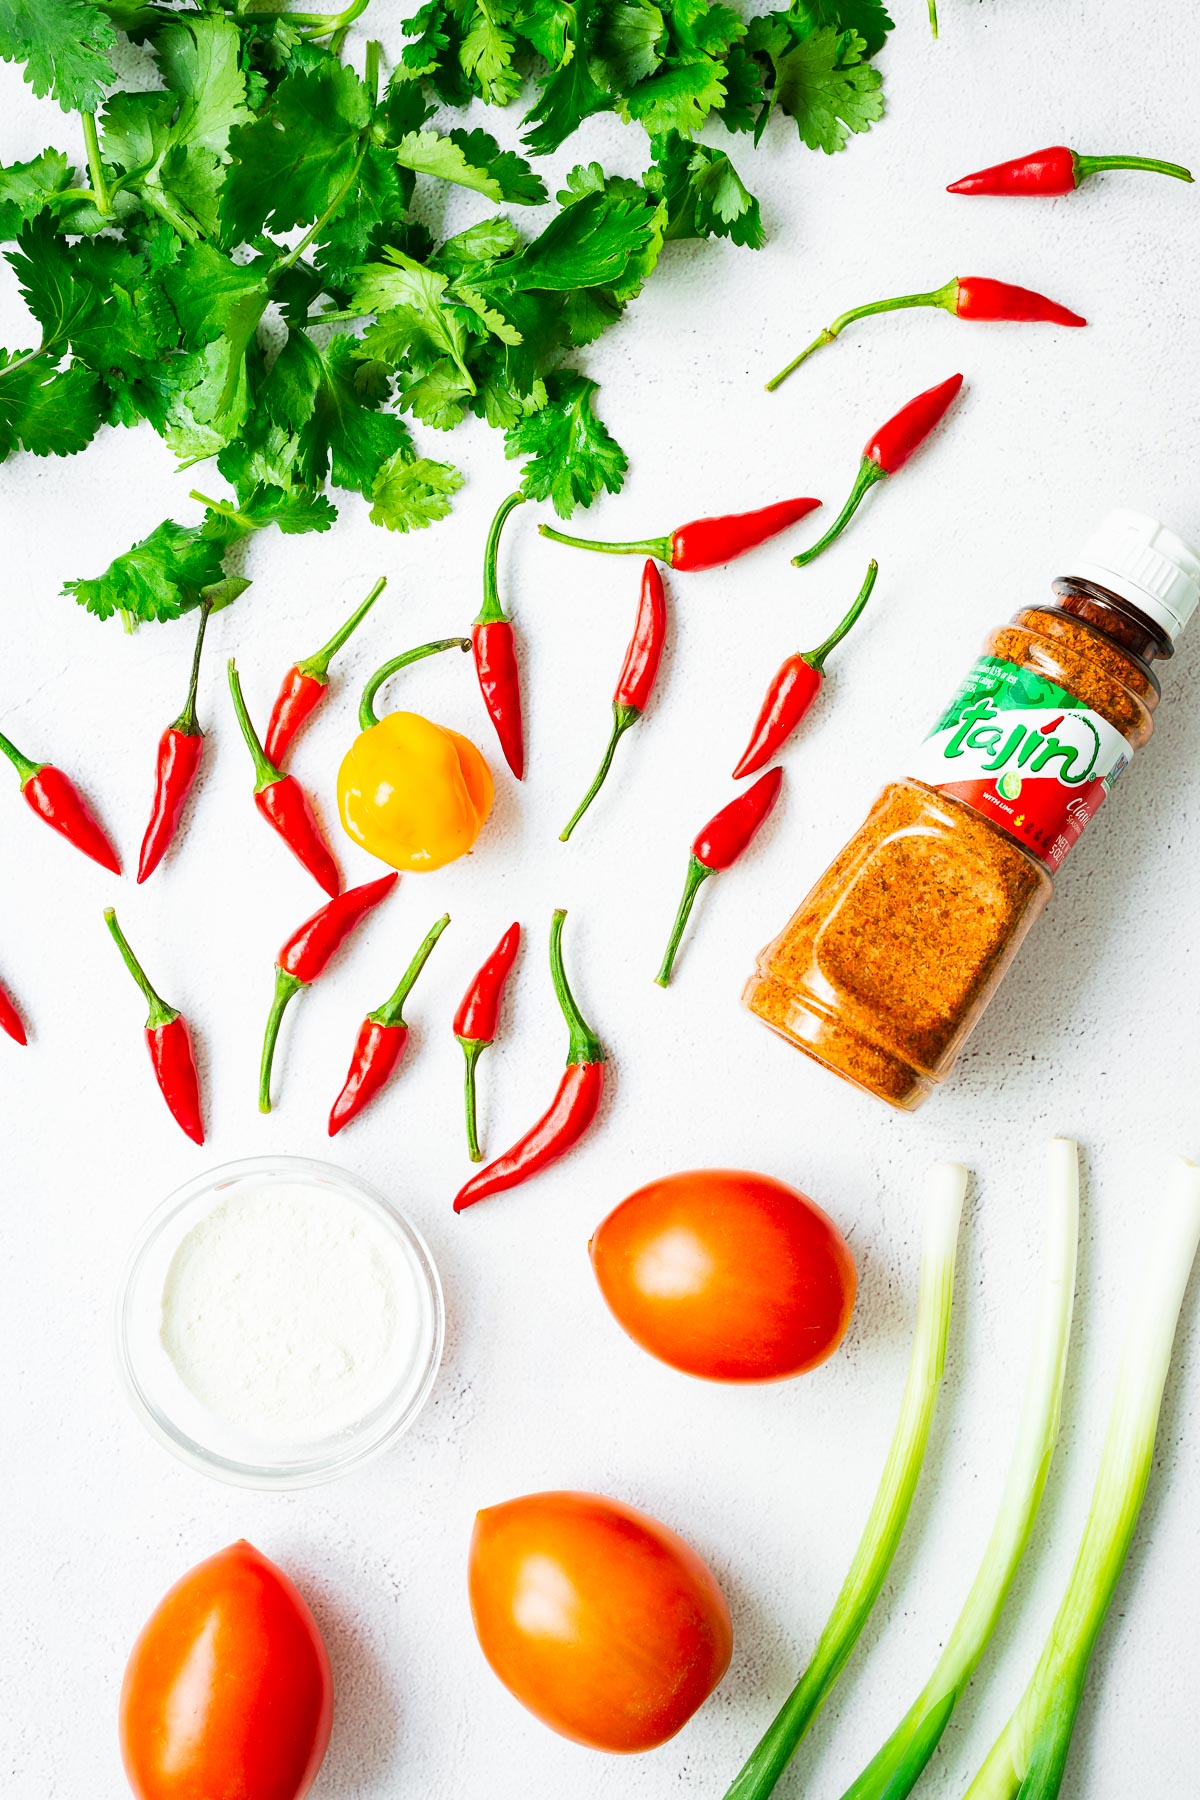 Optional flavour boosting ingredients for guacamole, including chillies, tomatoes, green onions, onion powder, cilantro and tajin seasoning. The ingredients are arranged in a flatlay on a light concrete surface.